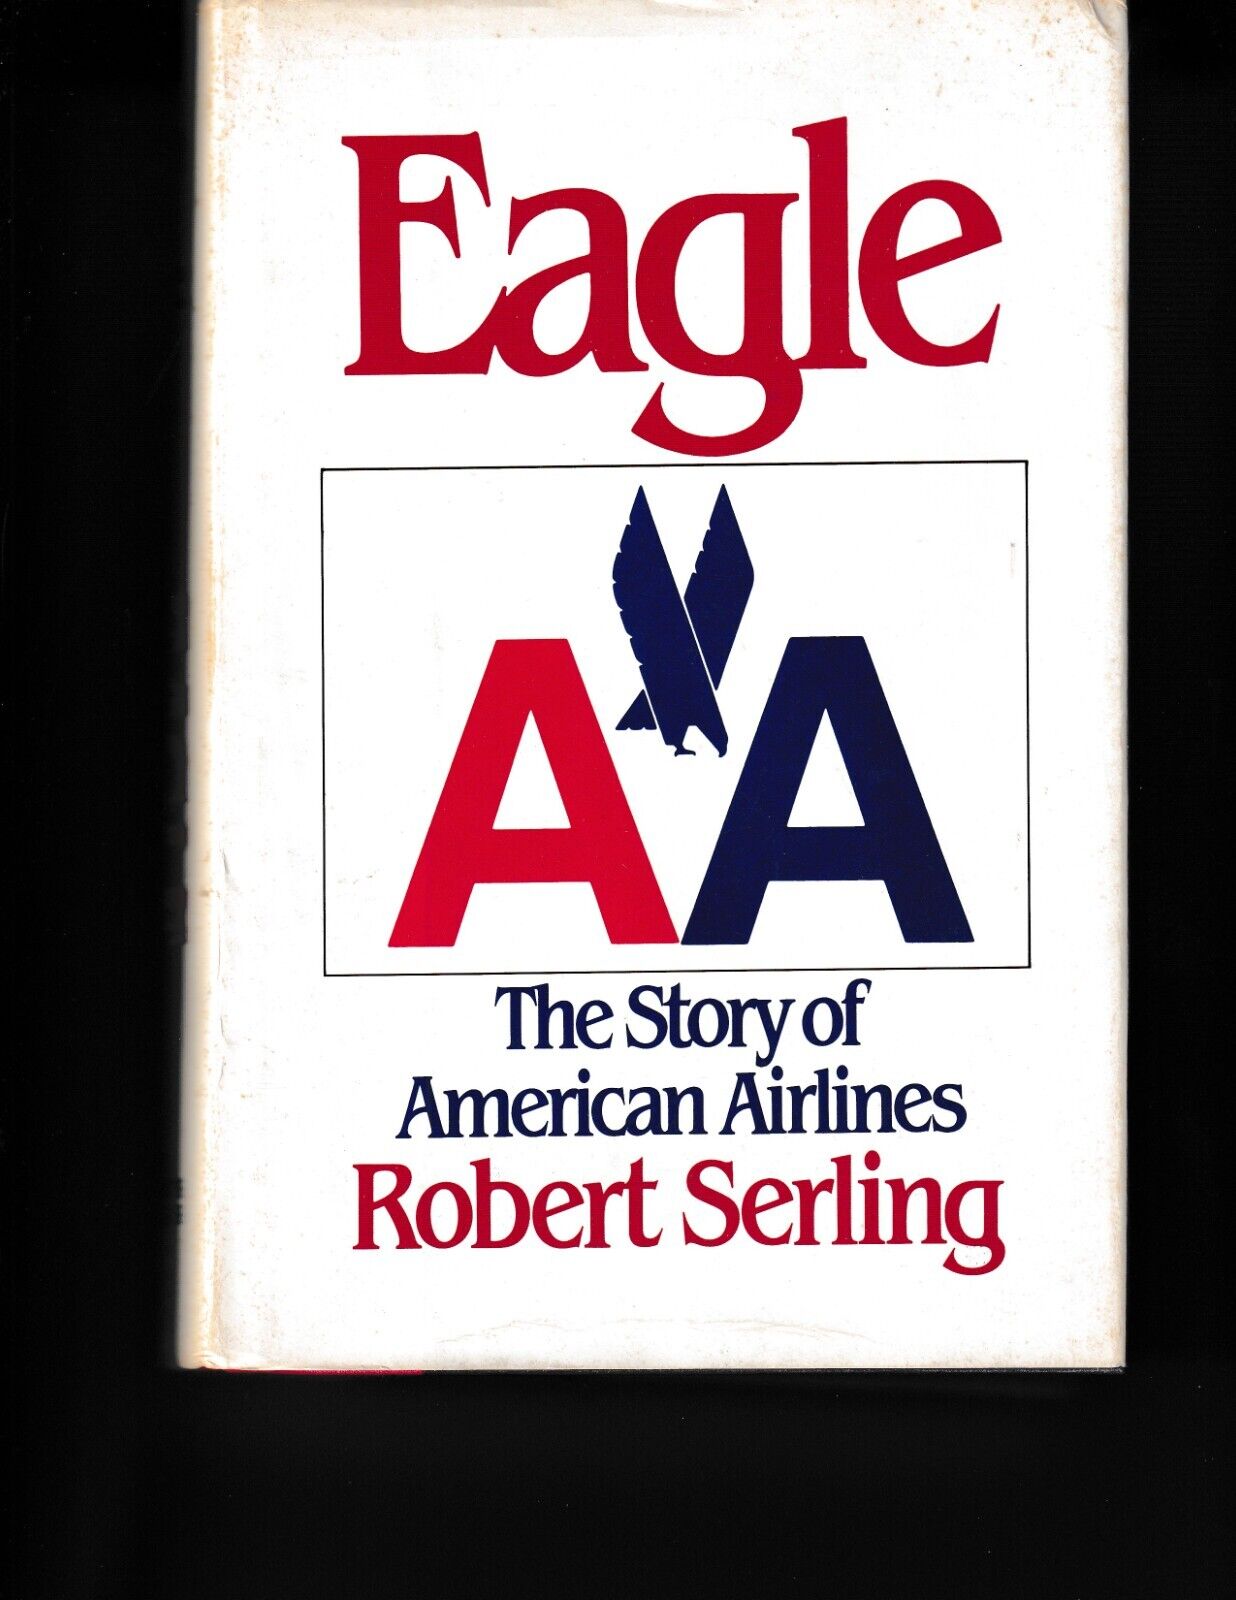 Eagle, The Story of American Airlines